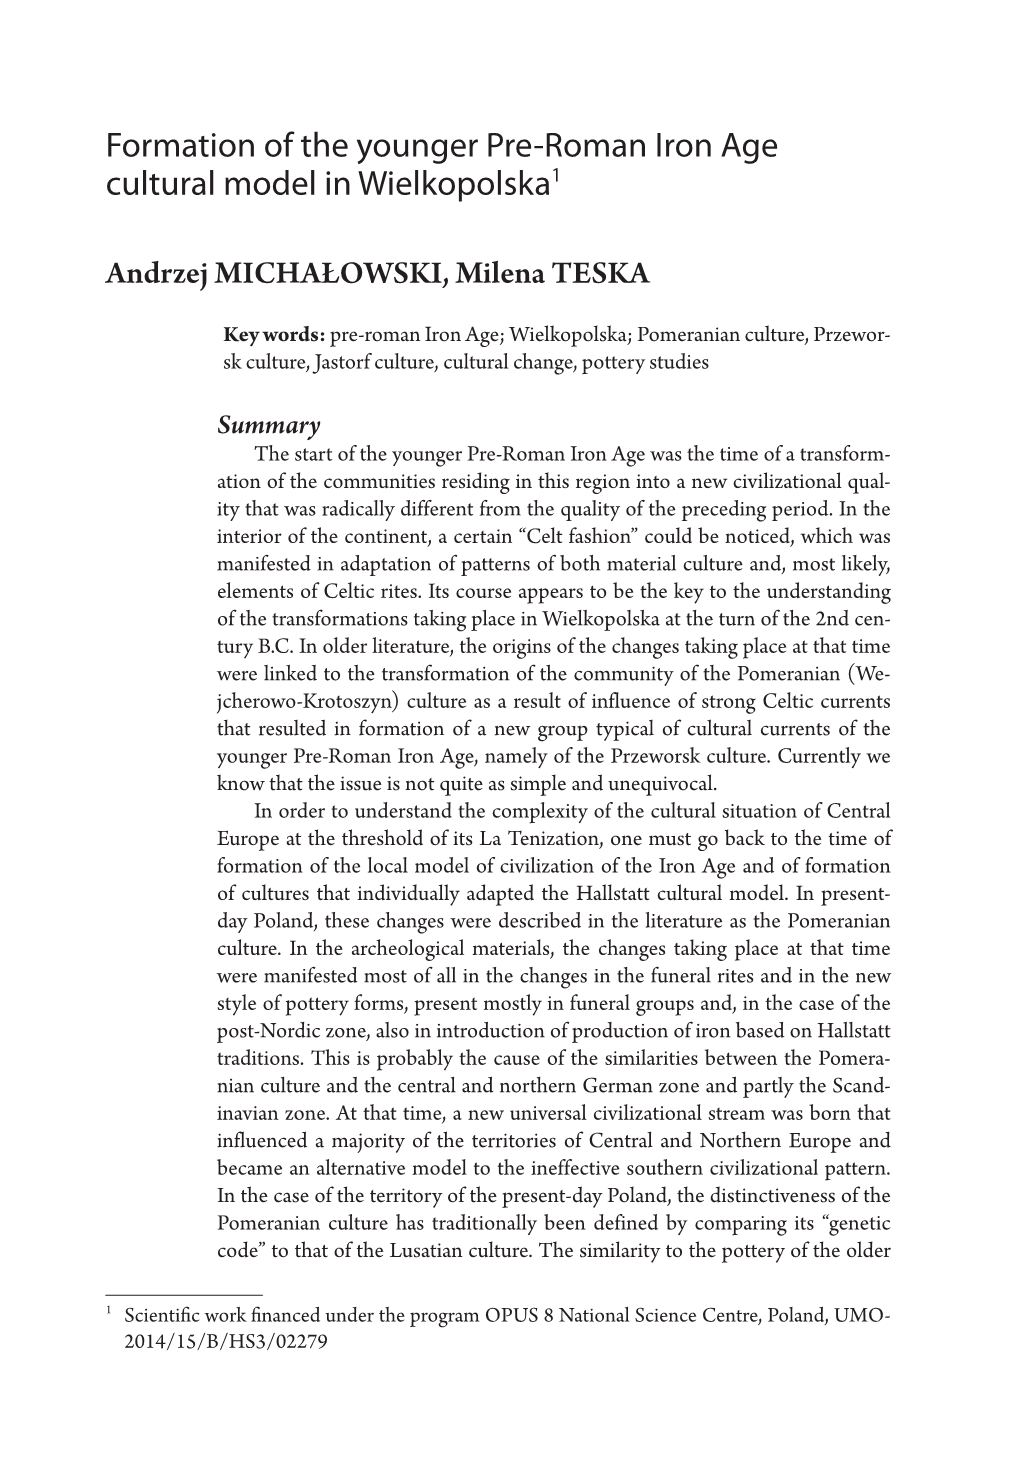 Formation of the Younger Pre-Roman Iron Age Cultural Model in Wielkopolska1